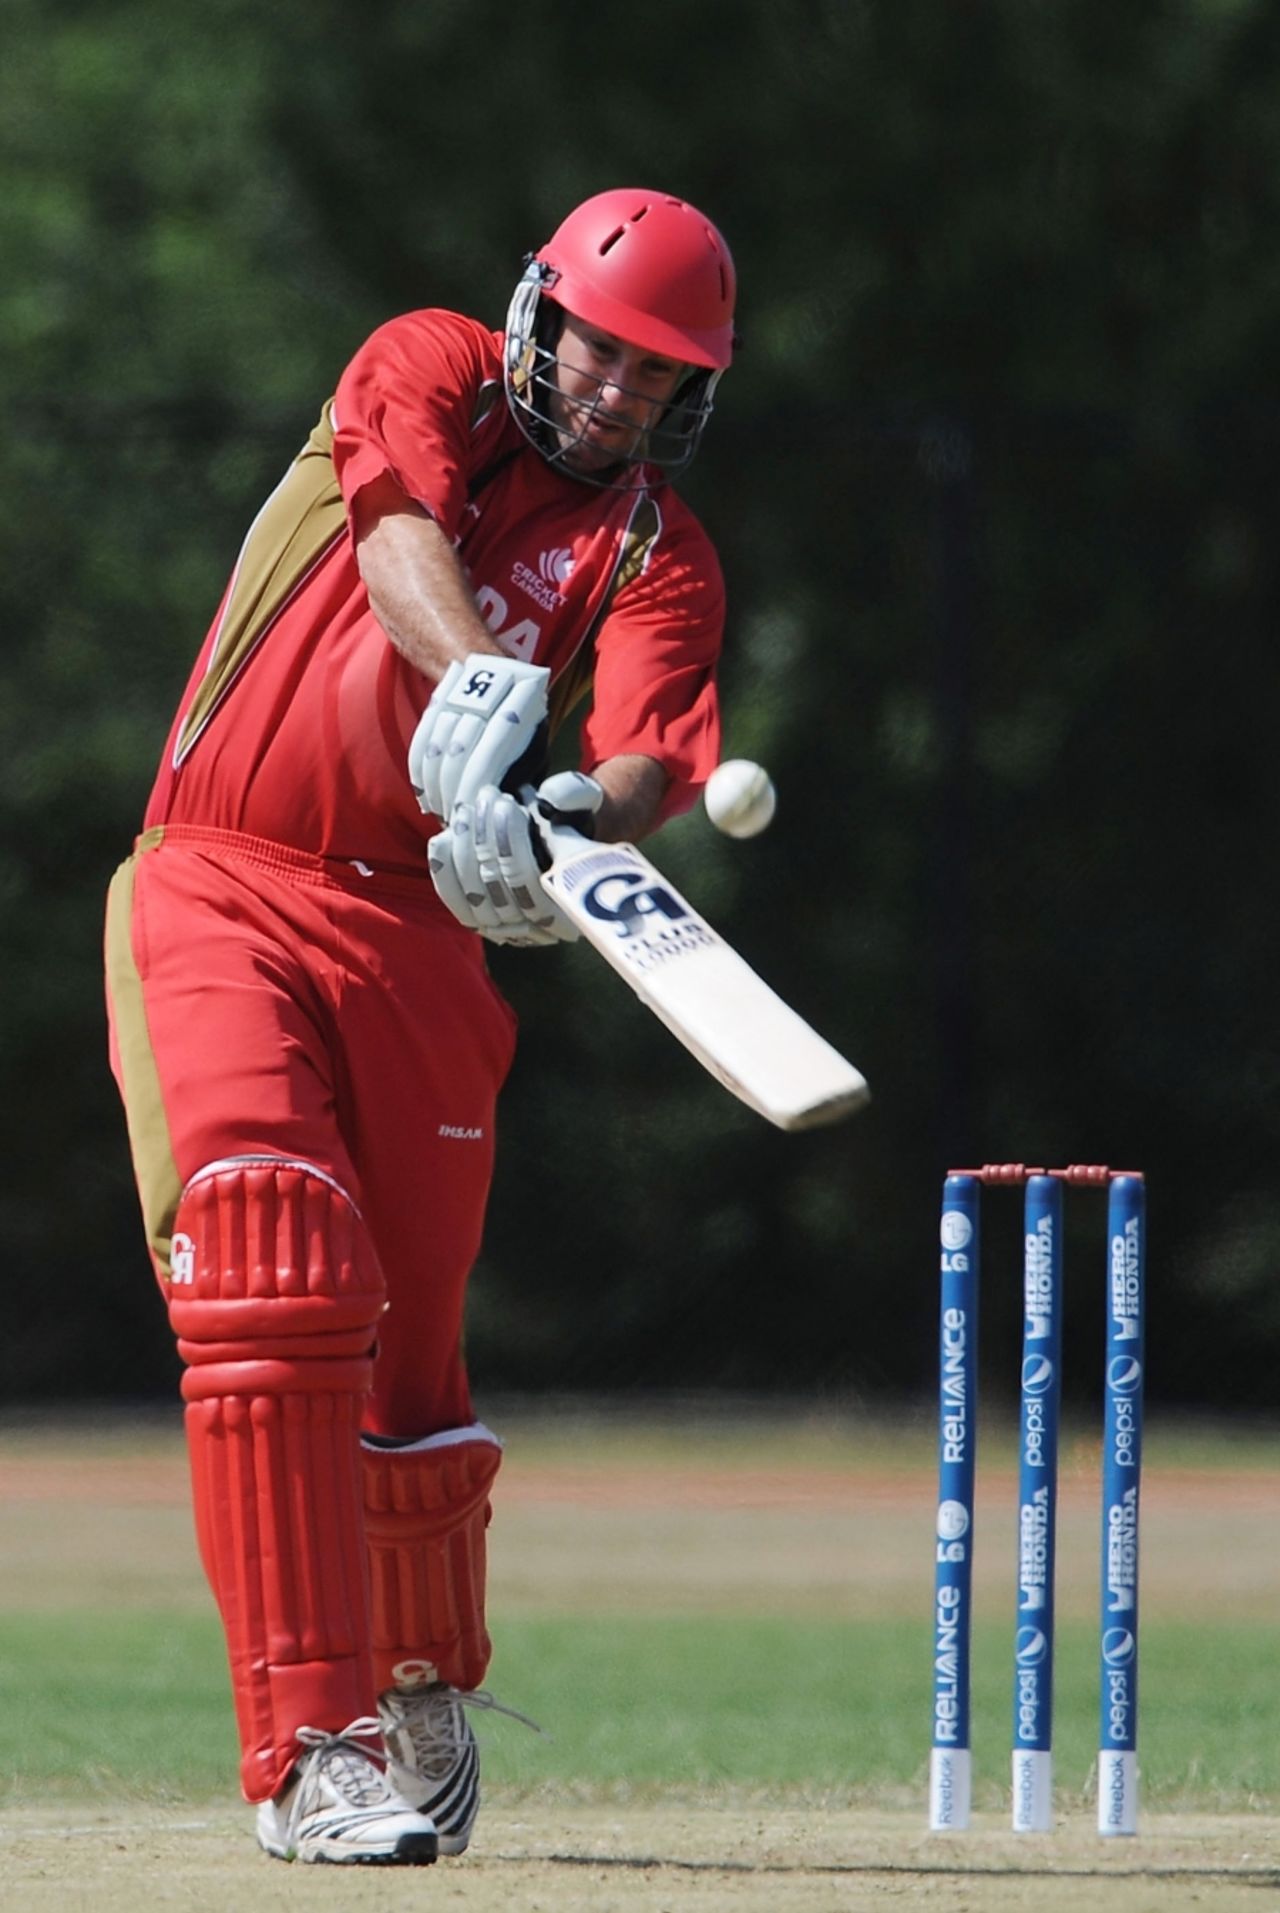 Geoff Barnett cracked a typically aggressive 34 against Netherlands, Netherlands v Canada, ICC WCL Division 1, Rotterdam, July 5 2010